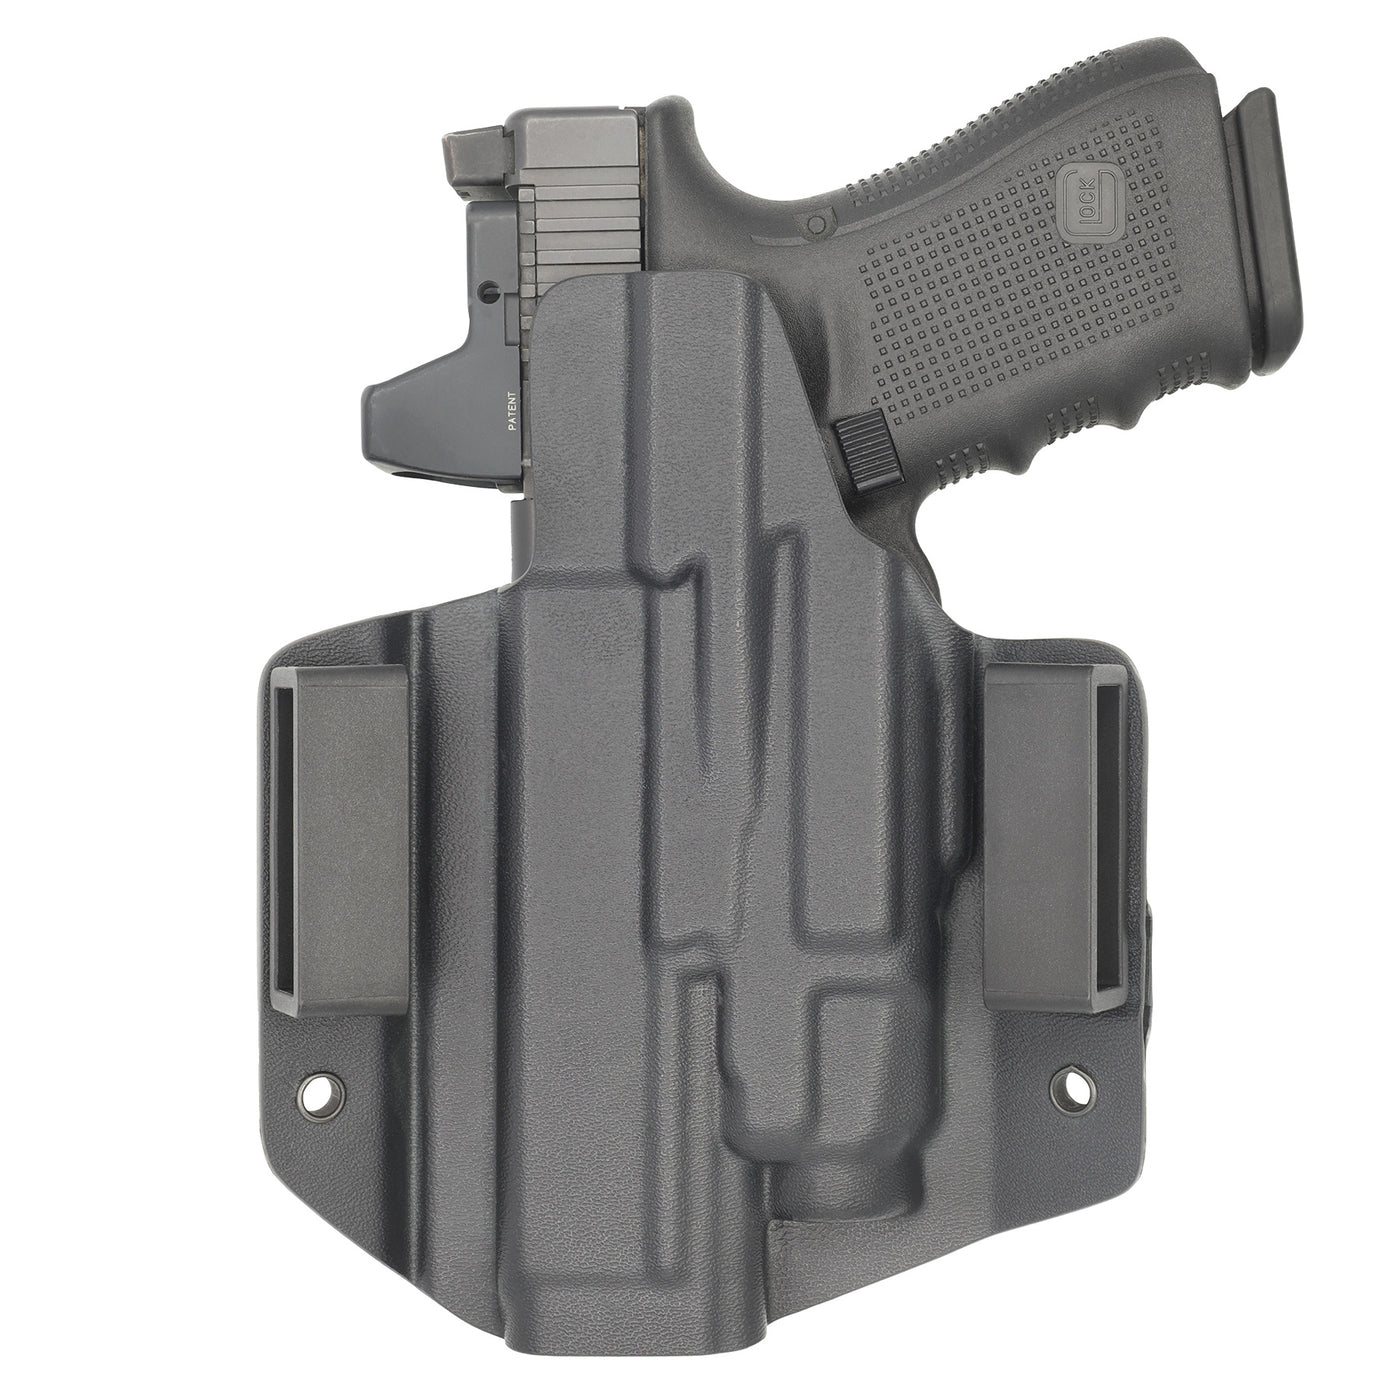 C&G Holsters custom OWB Tactical Poly80 c/v2 Streamlight TLR7/a in holstered position back view